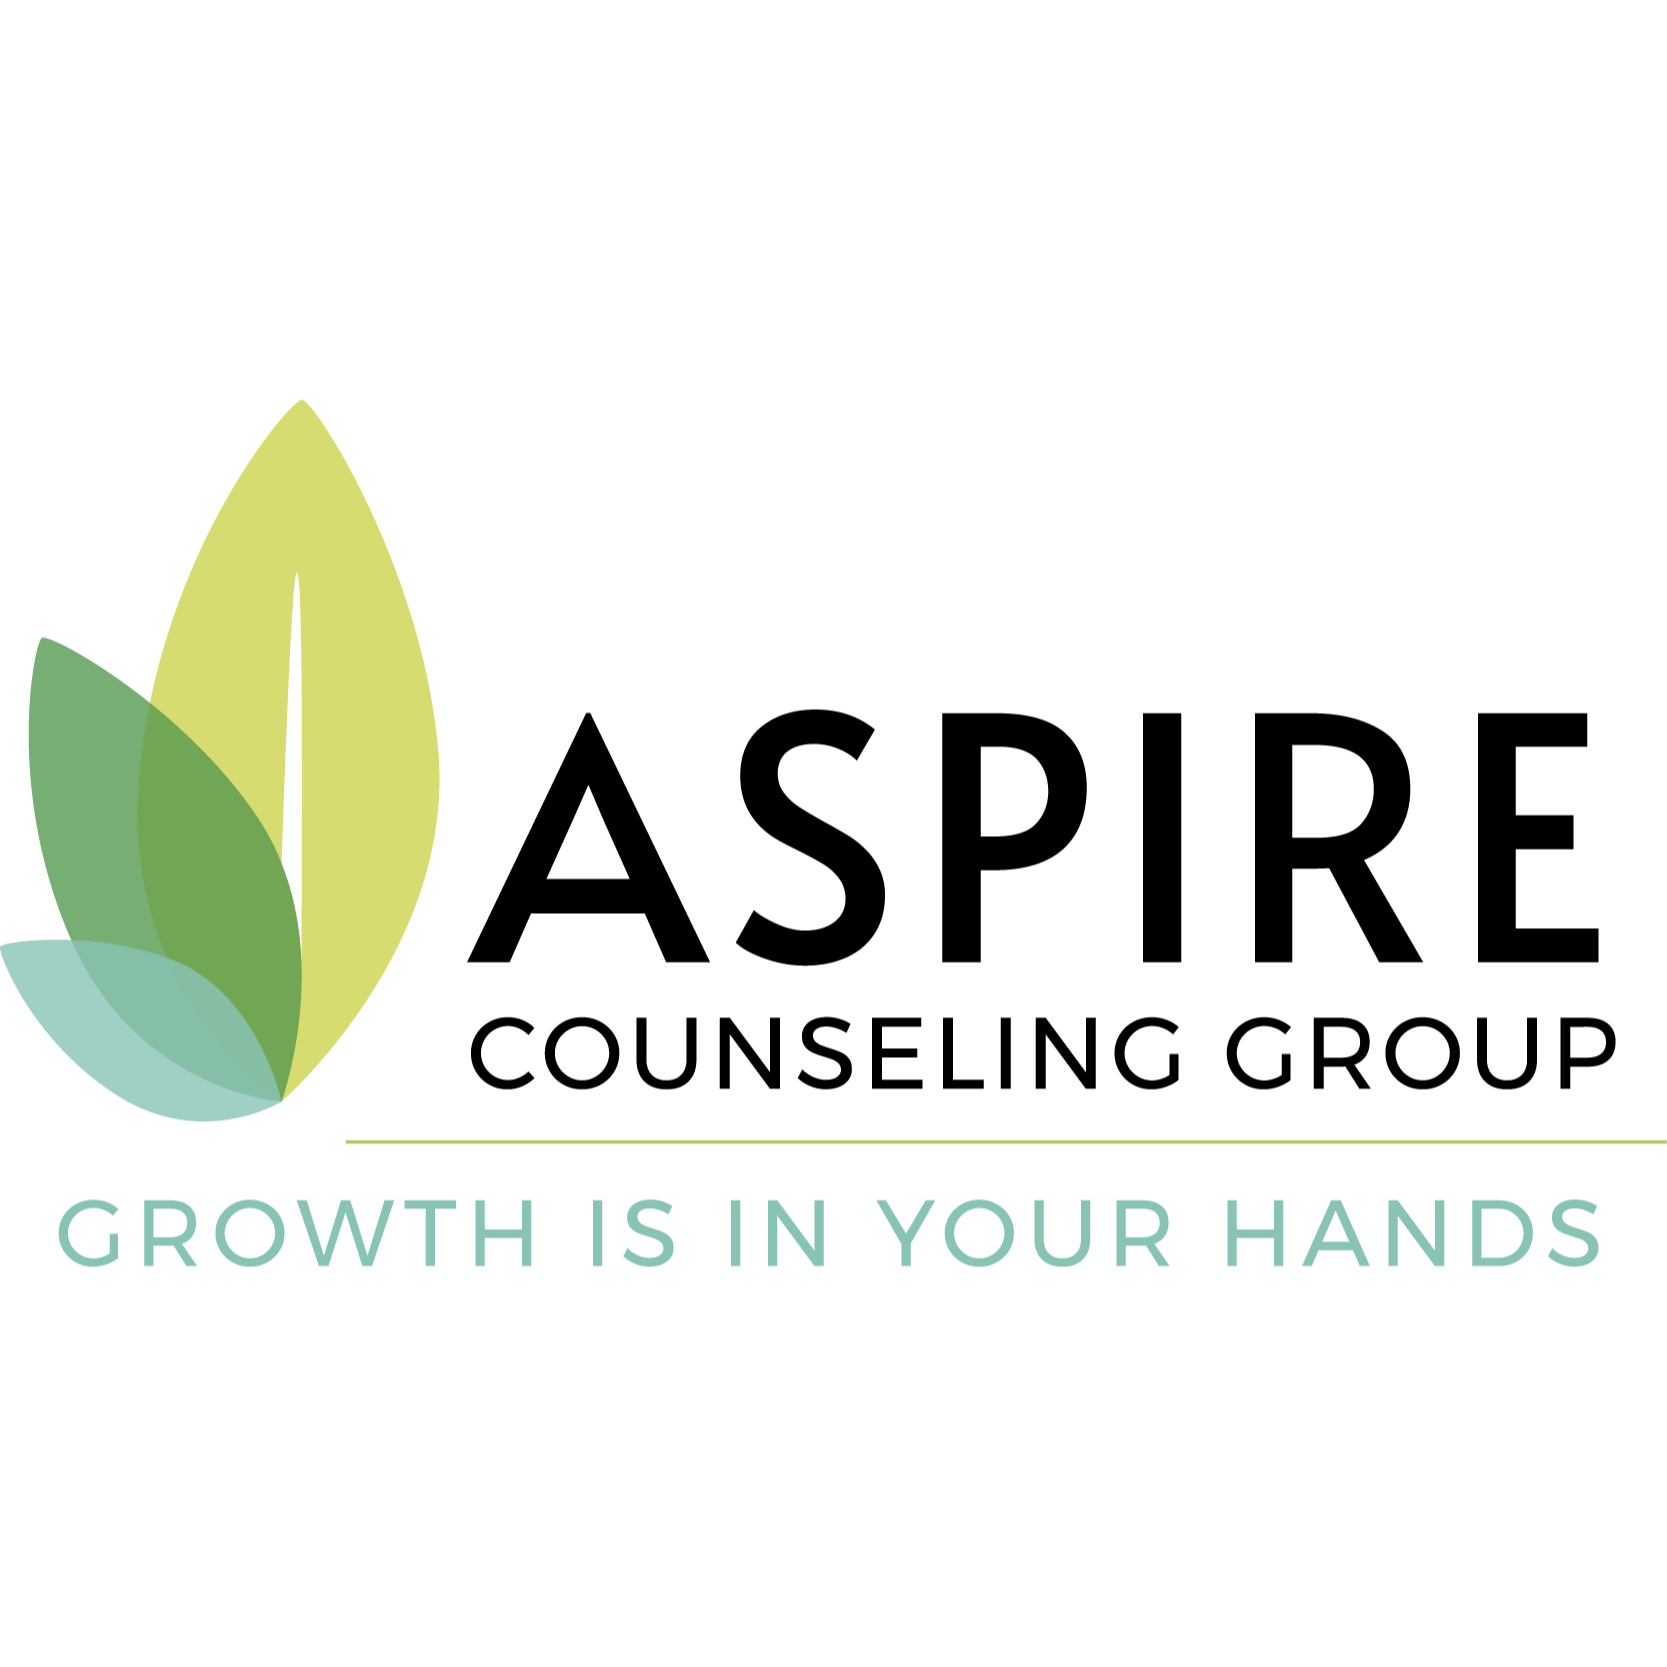 Aspire Counseling Group Logo